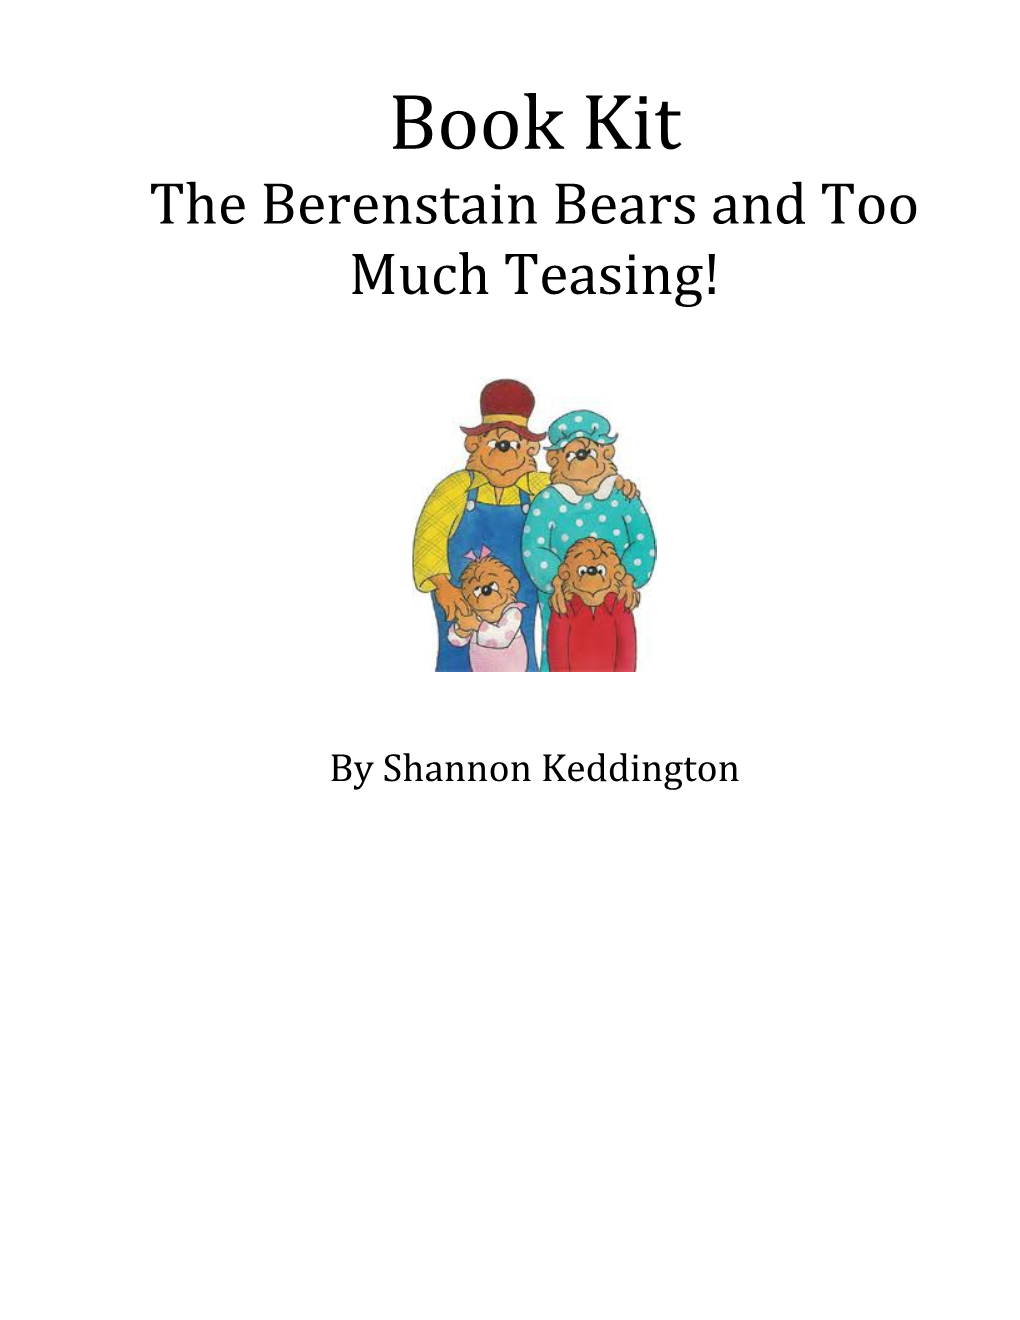 The Berenstain Bears and Too Much Teasing!